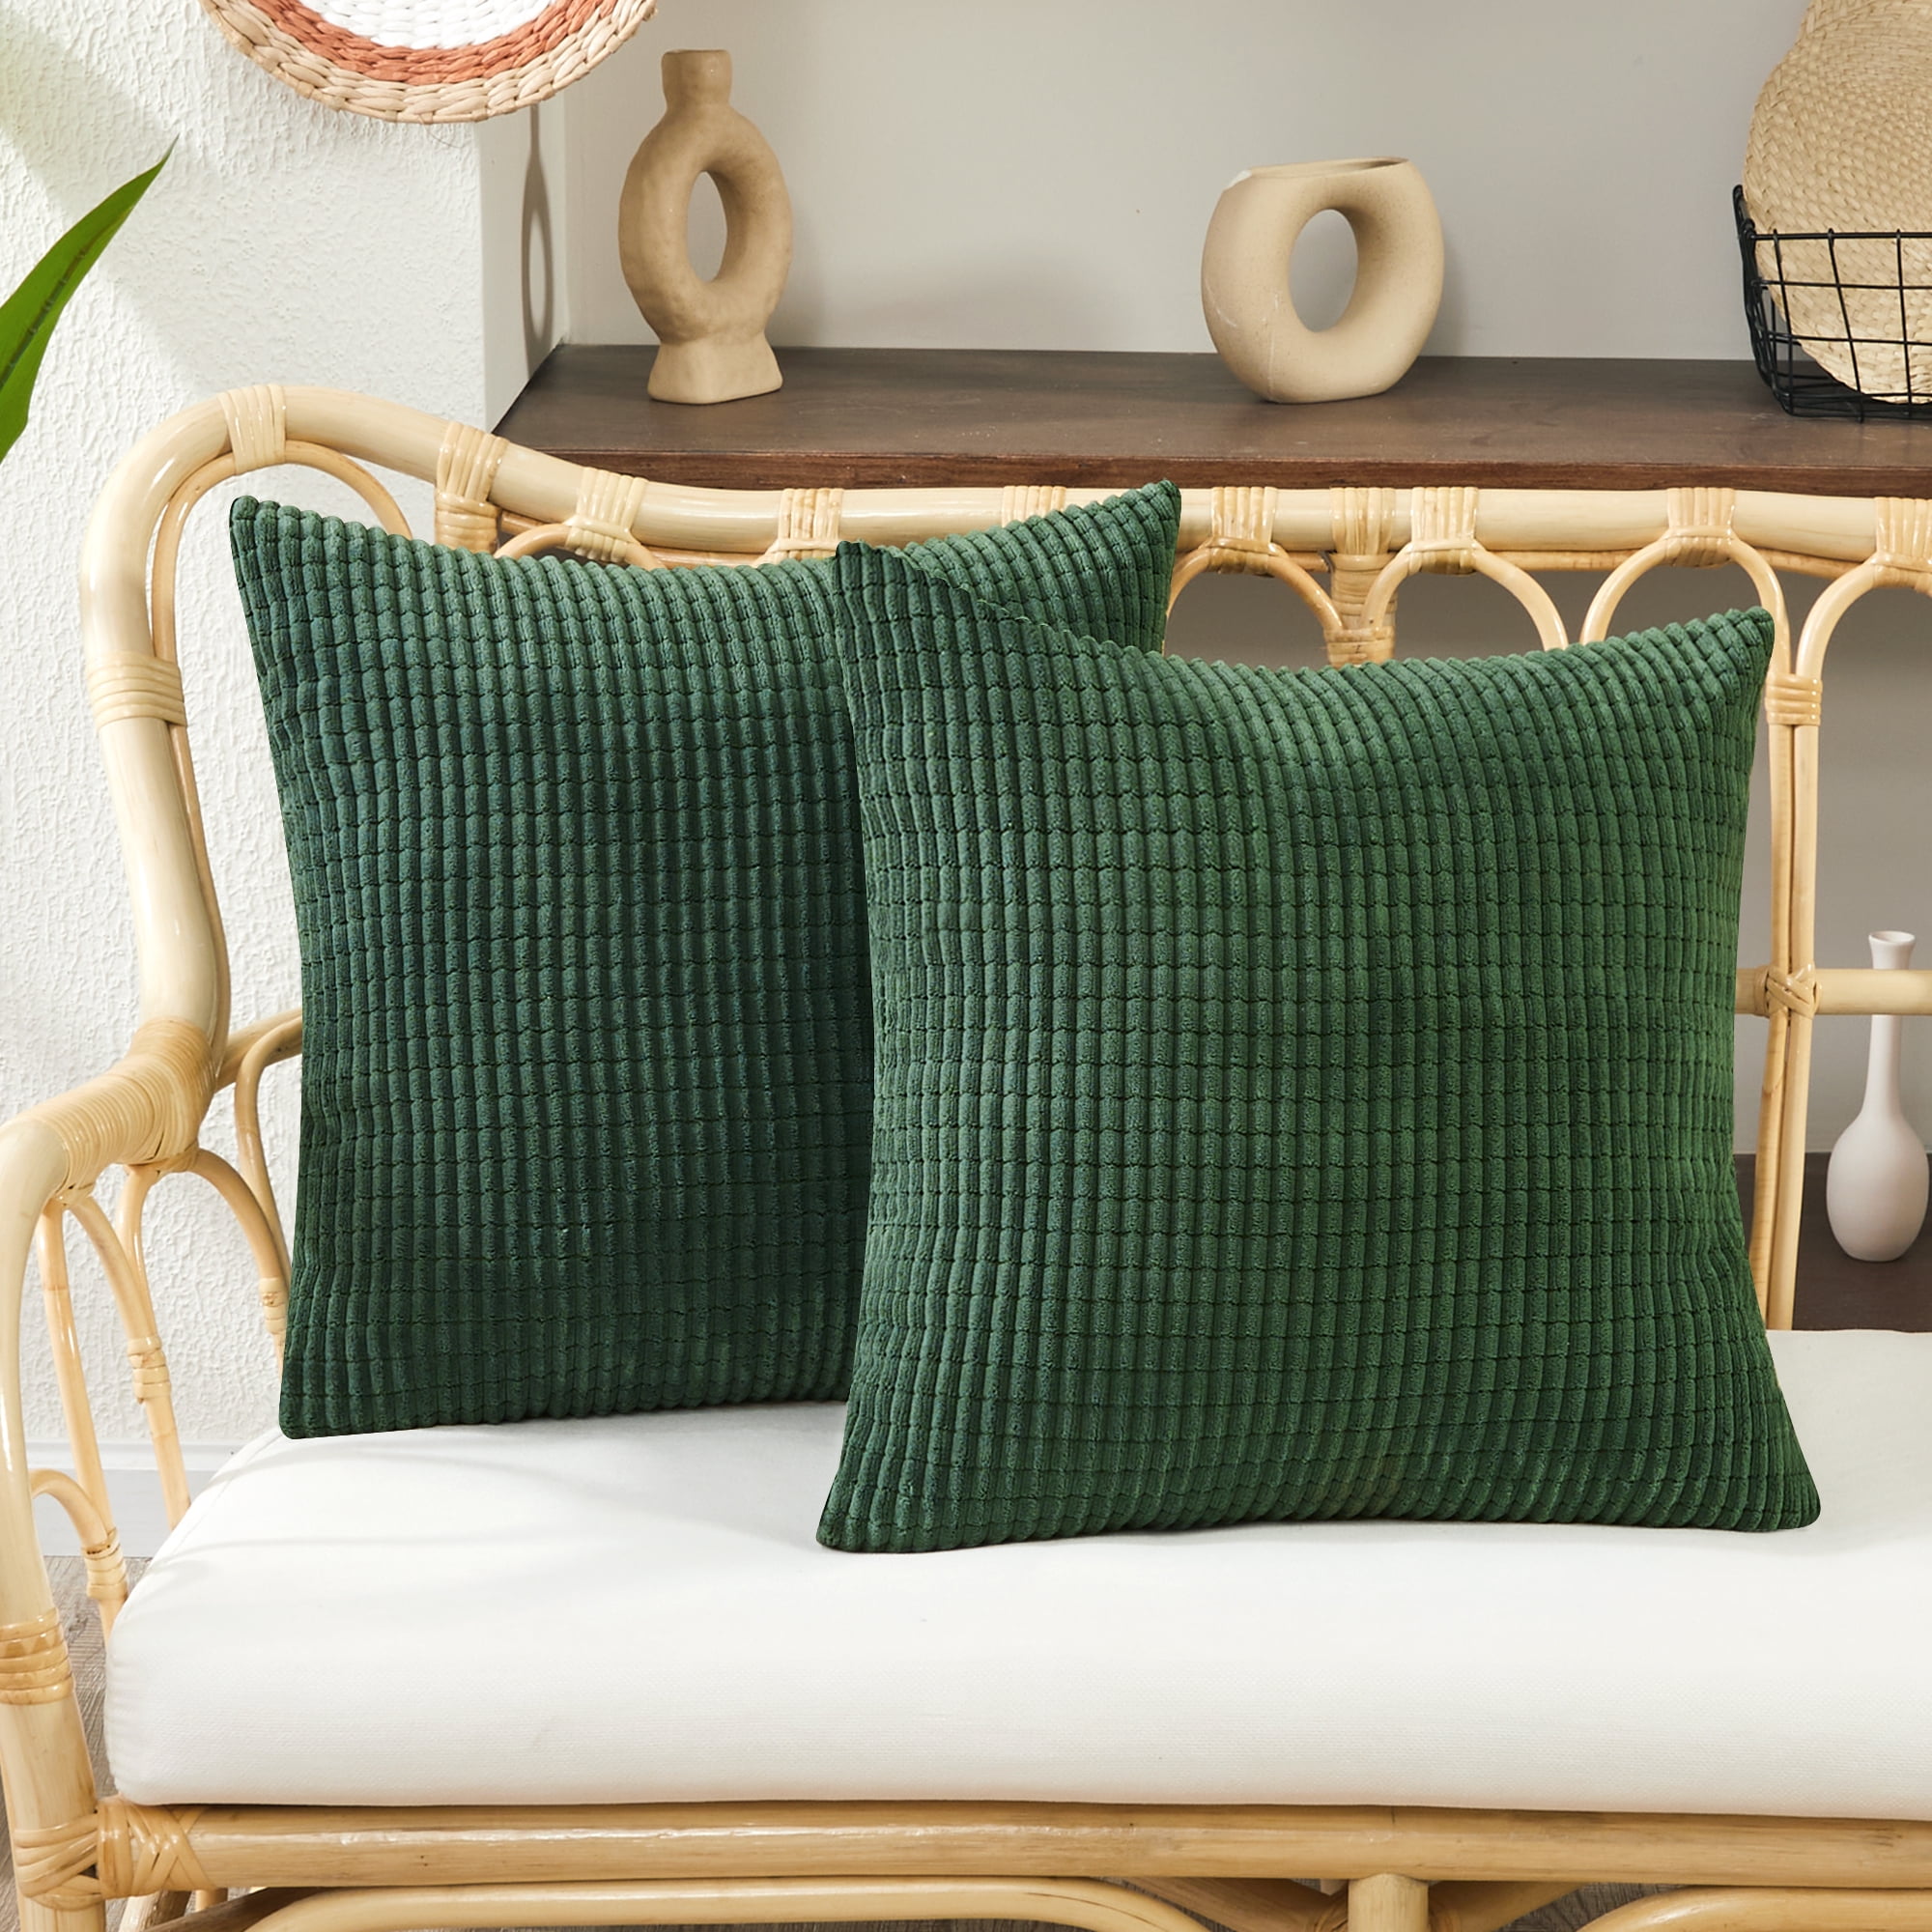 Fashion Velvet Solid Color Plaid Throw Pillow Case Home Office Cushion Cover 